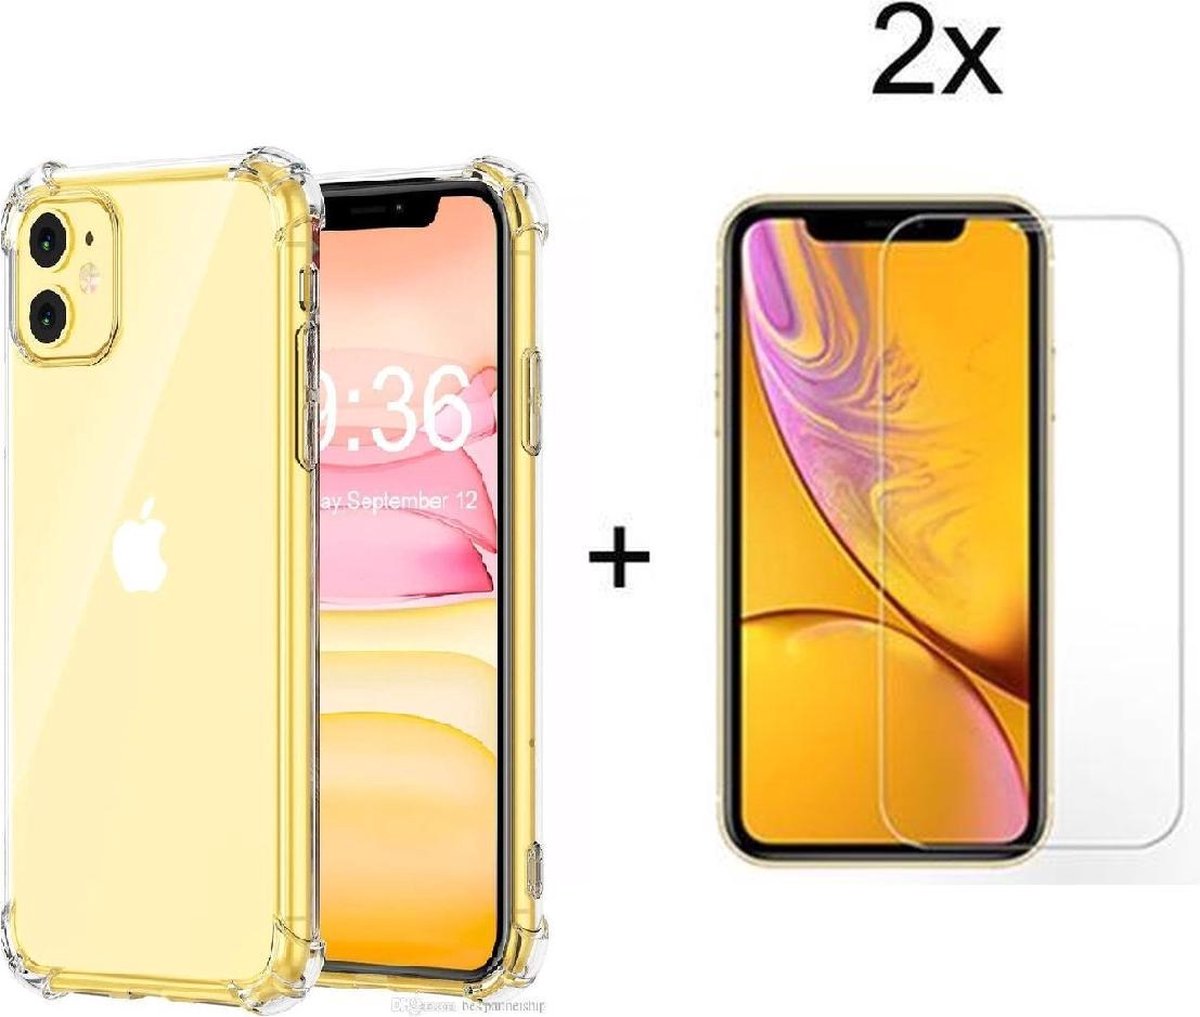 Apple iPhone 11 - Anti Shock - Tempered Glass - Transparant - Hoesje - AntiShock – Doorzichtig – Anti-Shock - TPU Case – BackCover – Silicone - Hybrid Case - Screen protector - Bumper